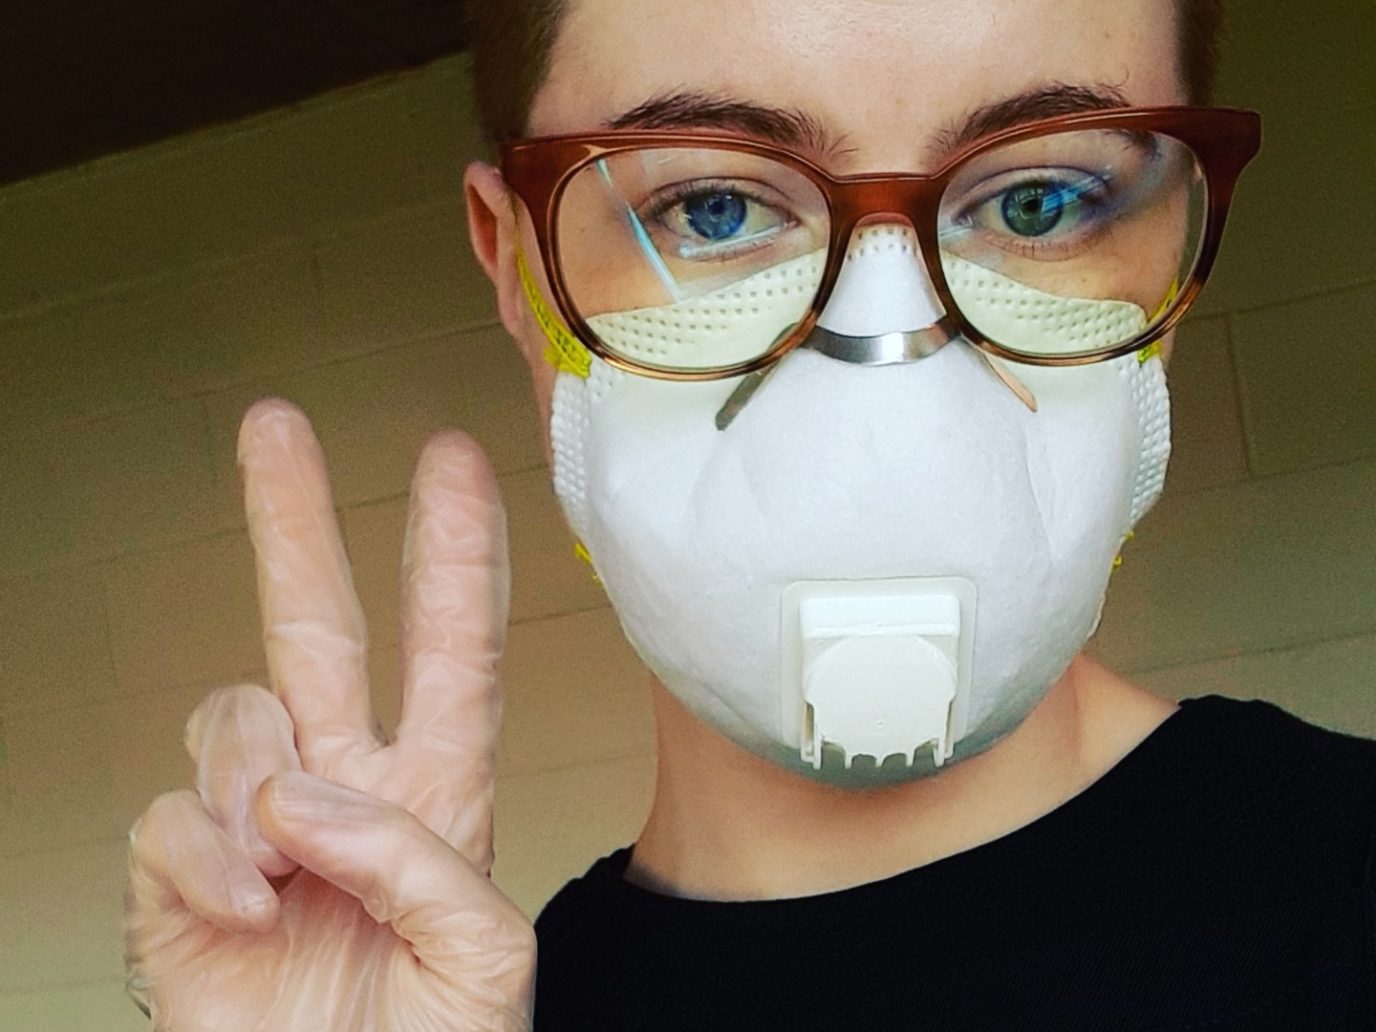 Megan Murray Whole Foods employee with PPE April 2020